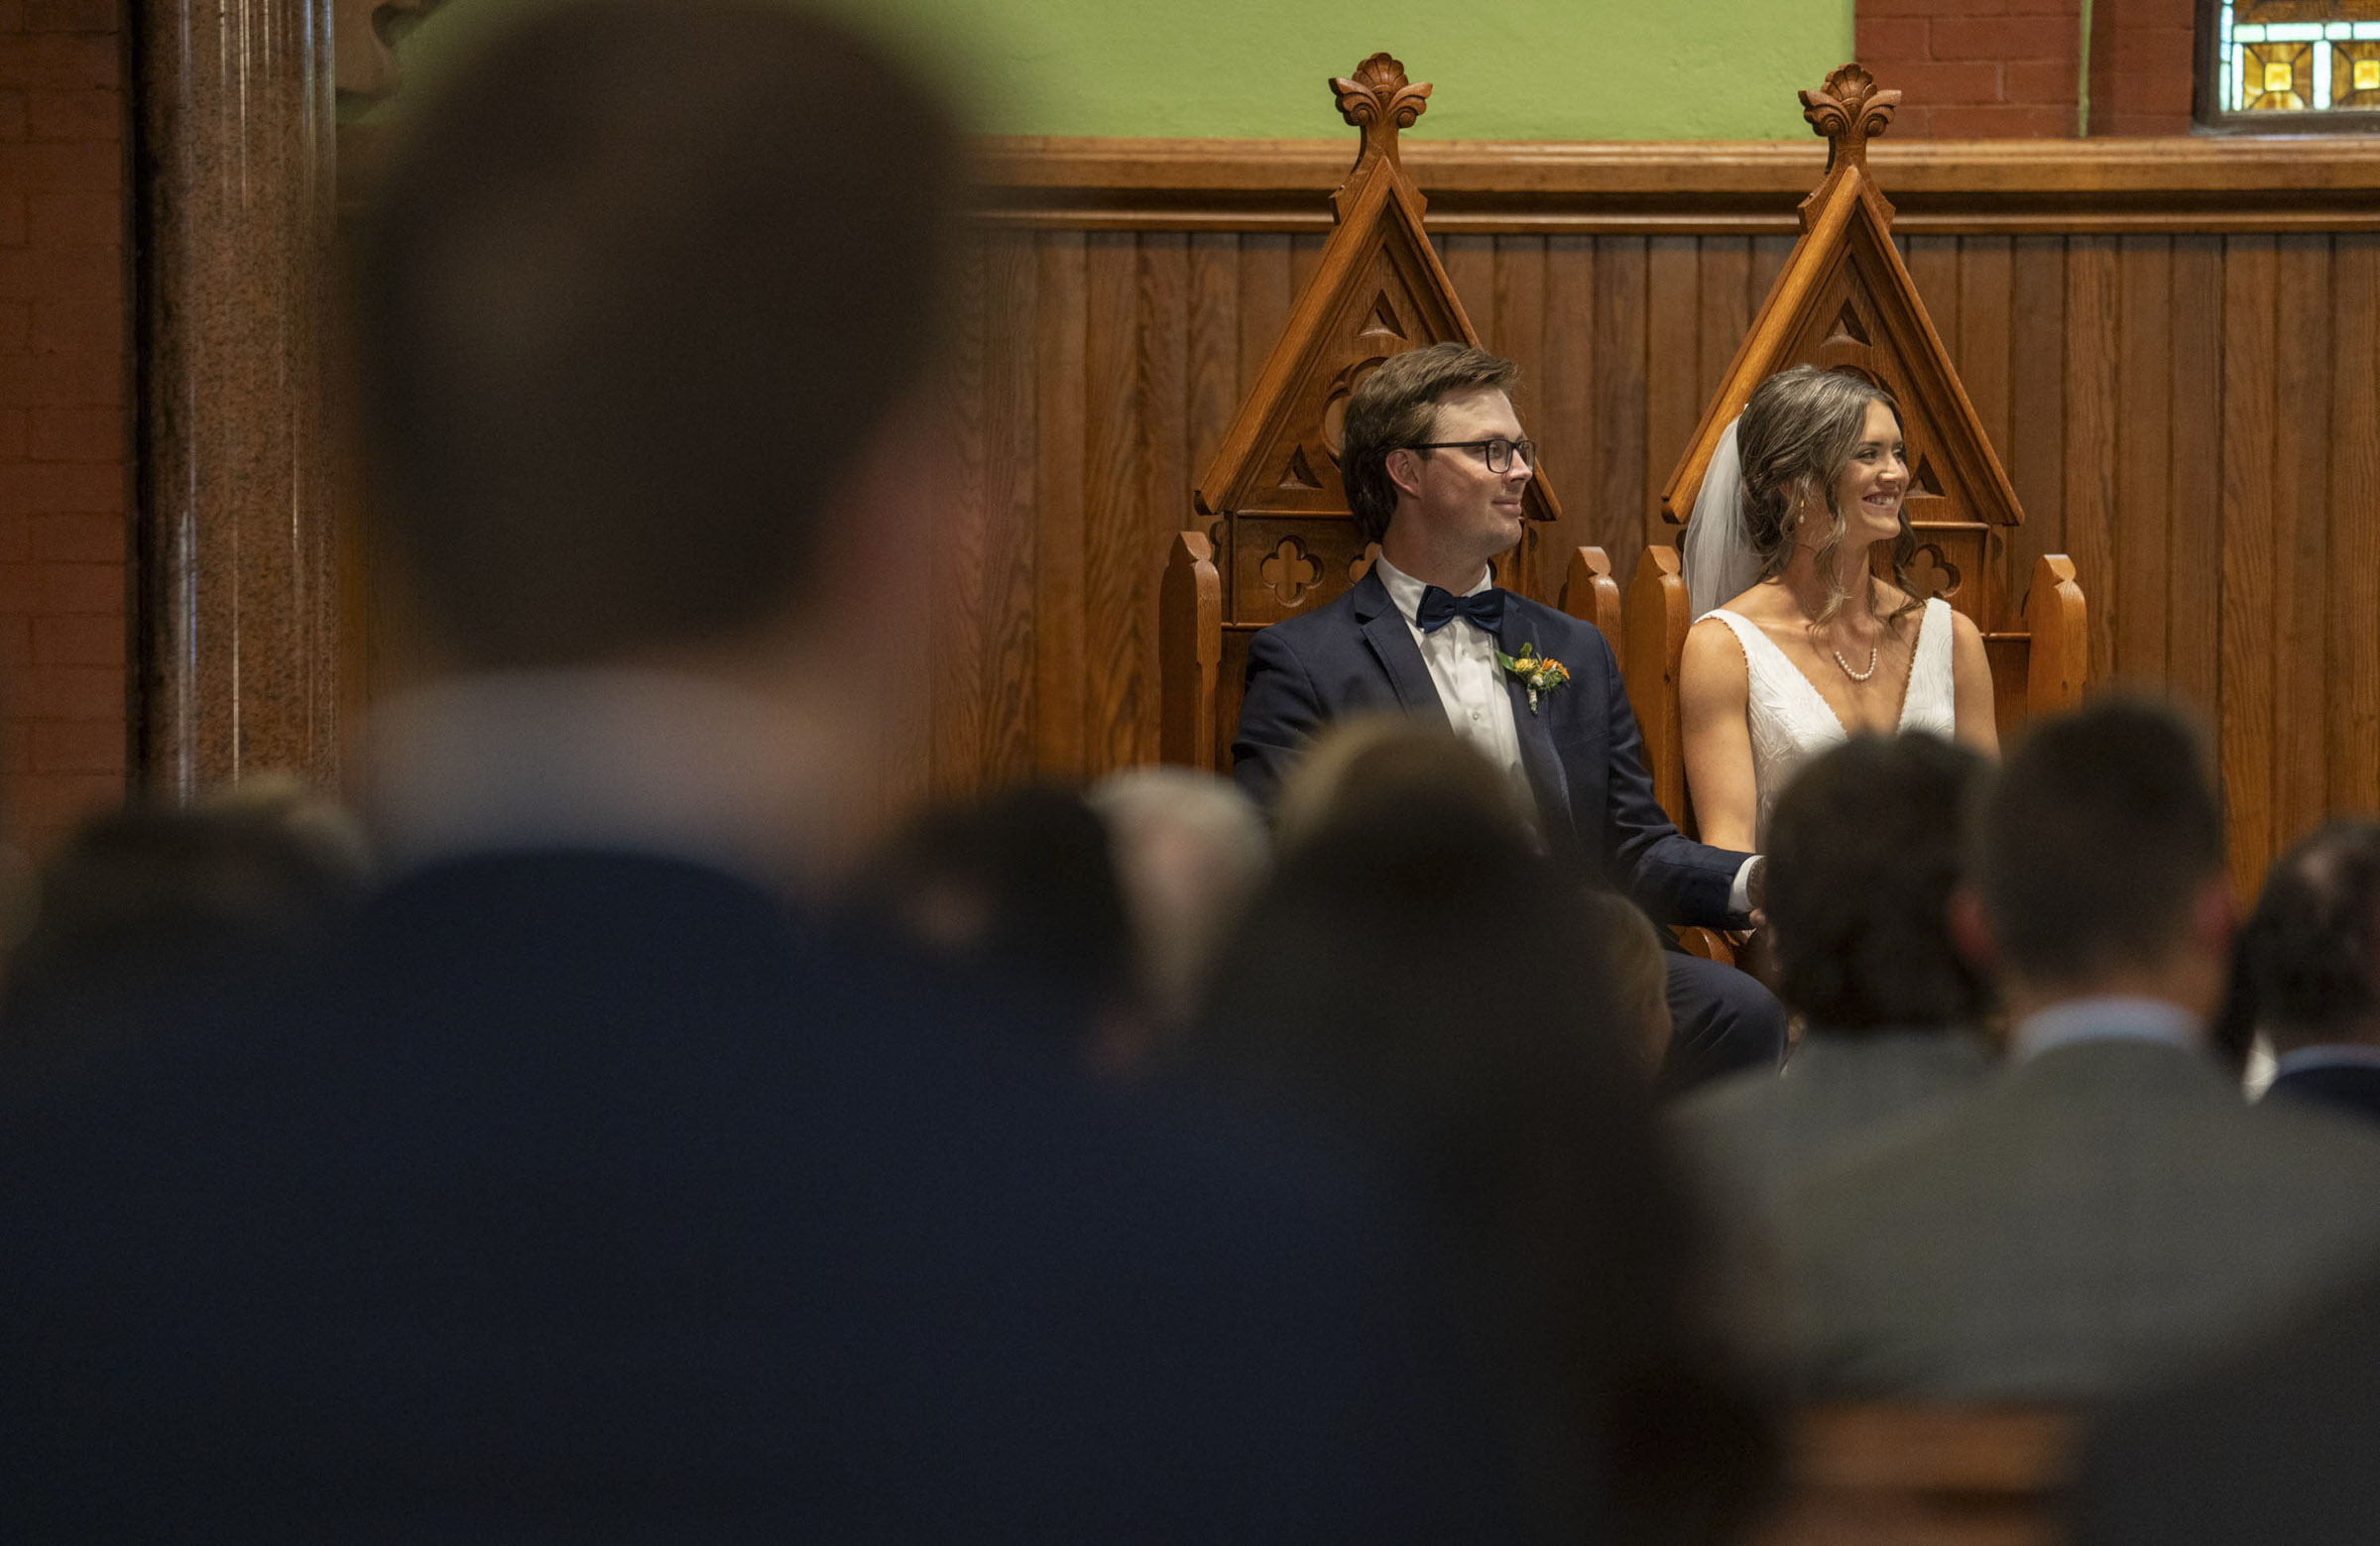 The couple seated in the chapel looking toward the priest during the wedding ceremony